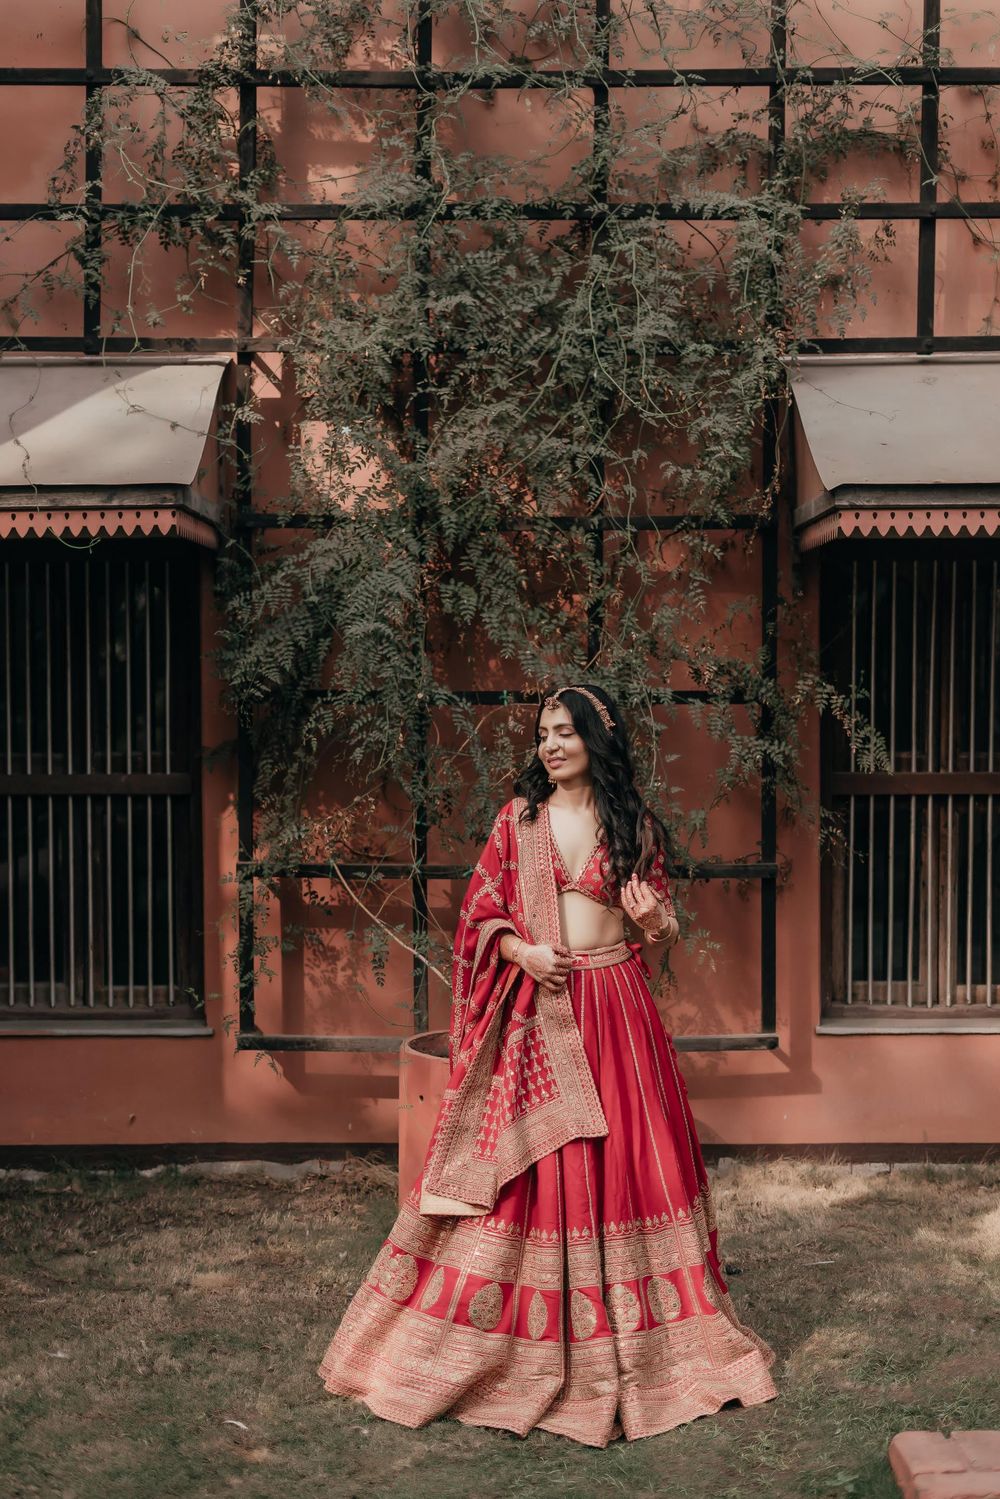 Photo of Bride in a red Sabyasachi lehenga for the wedding.